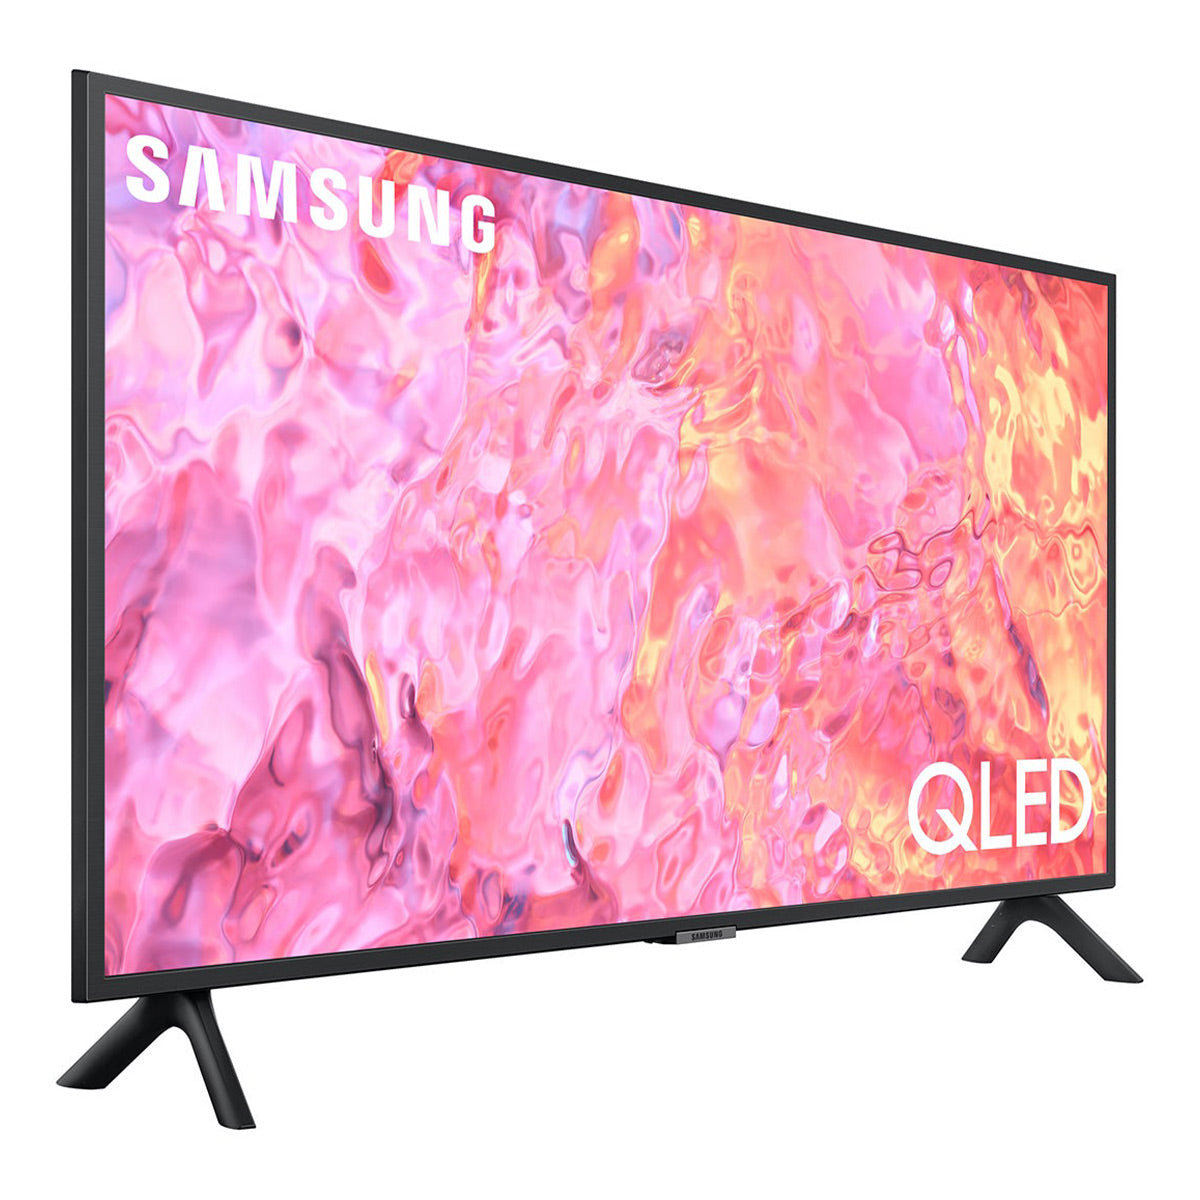 Samsung QN43Q60CA 43" QLED 4K Smart TV (2023) with HW-Q800C 5.1.2 Ch Soundbar and Wireless Subwoofer (2023)